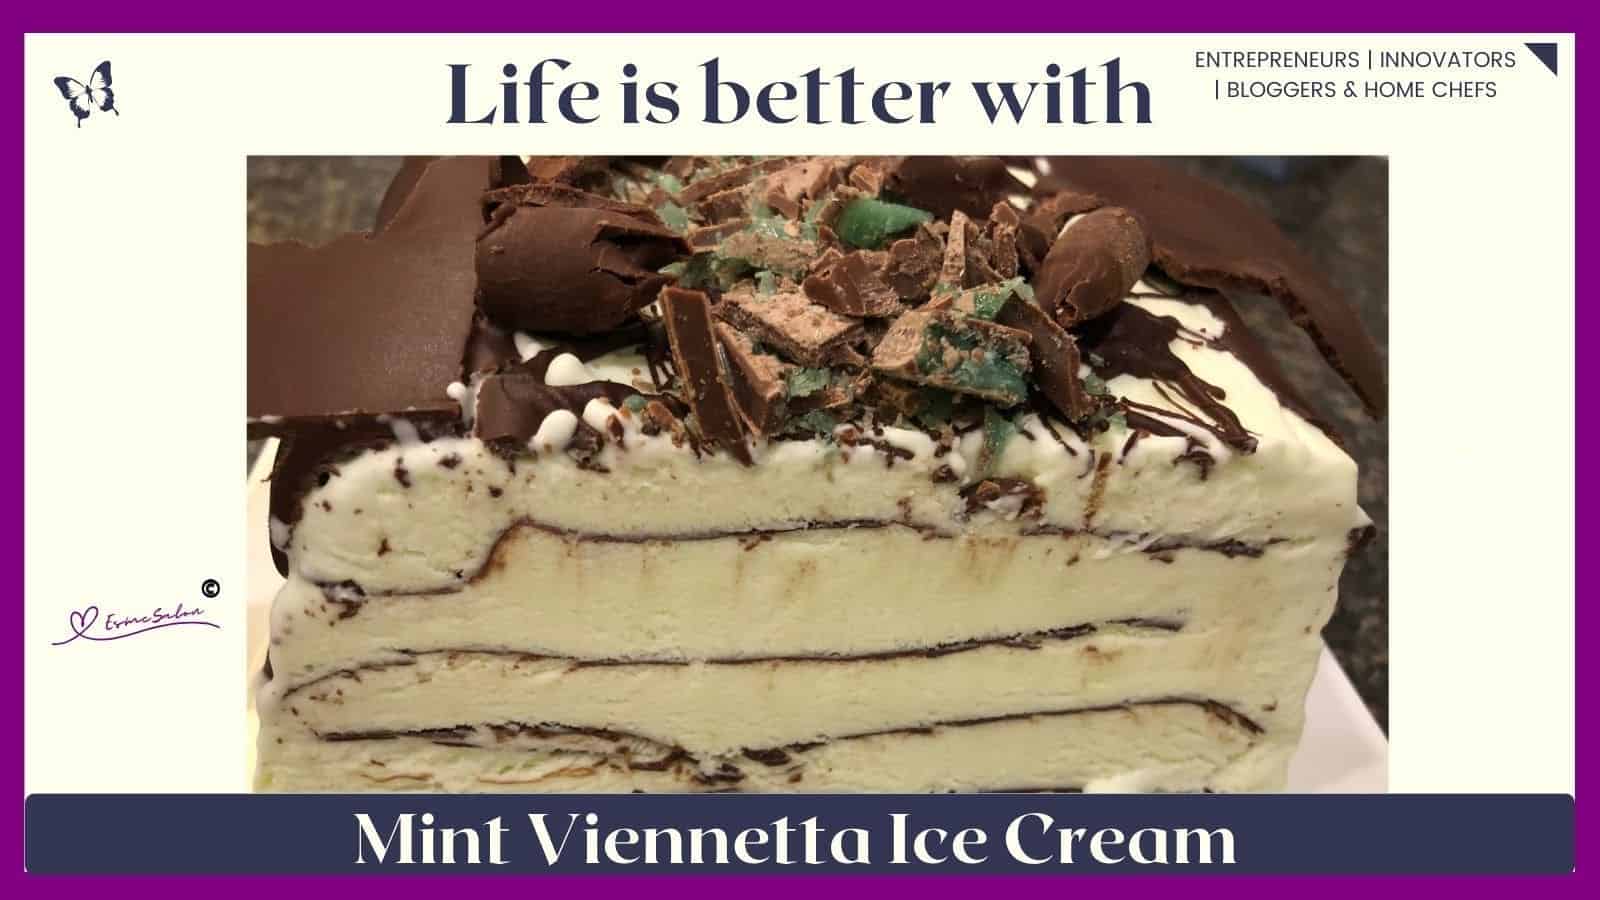 an image of a sliced Mint Viennetta Ice Cream on a white platter topped with peppermint crisp and chocolate shards